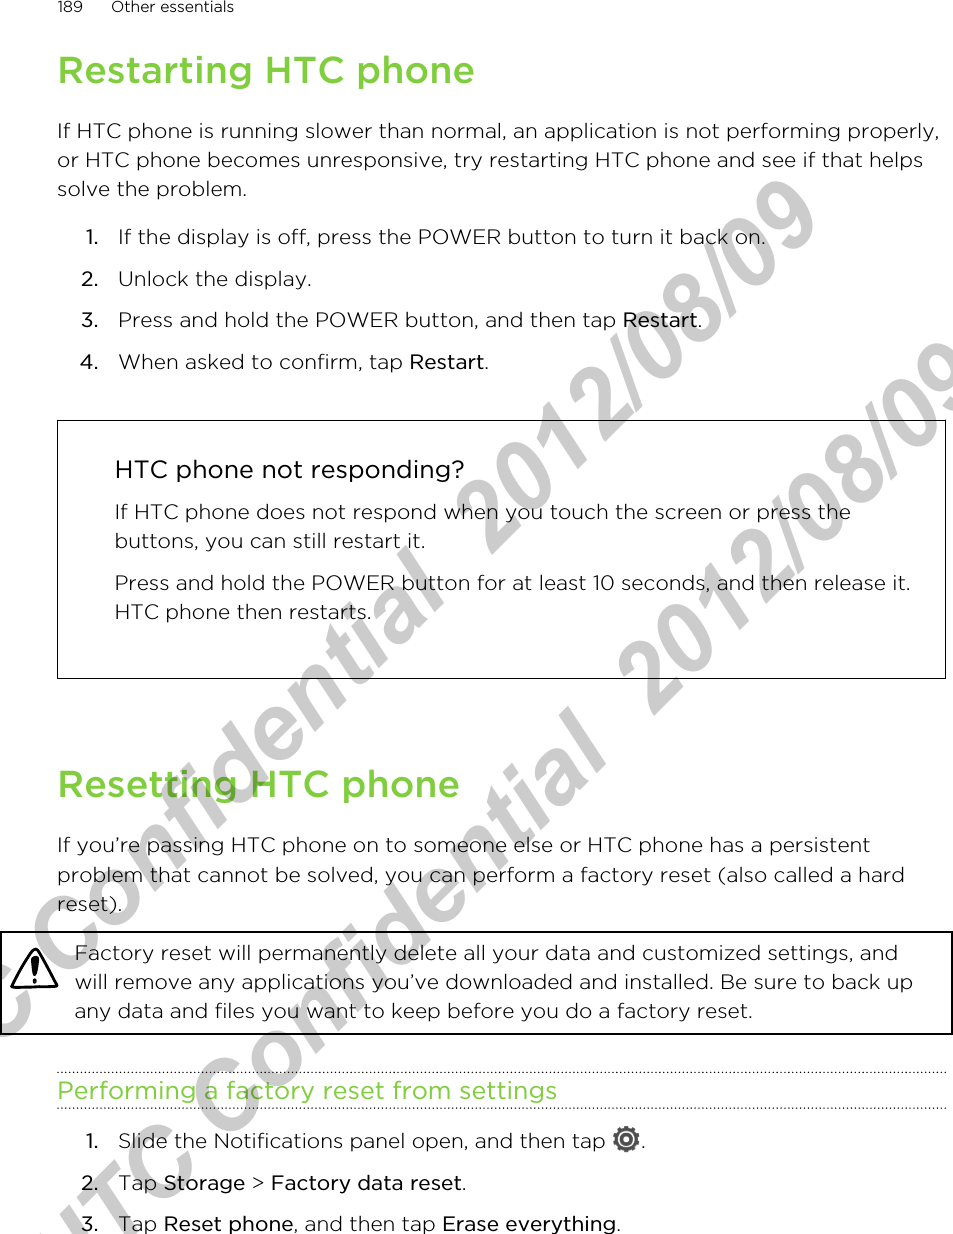 Restarting HTC phoneIf HTC phone is running slower than normal, an application is not performing properly,or HTC phone becomes unresponsive, try restarting HTC phone and see if that helpssolve the problem.1. If the display is off, press the POWER button to turn it back on.2. Unlock the display.3. Press and hold the POWER button, and then tap Restart.4. When asked to confirm, tap Restart. HTC phone not responding?If HTC phone does not respond when you touch the screen or press thebuttons, you can still restart it.Press and hold the POWER button for at least 10 seconds, and then release it.HTC phone then restarts.Resetting HTC phoneIf you’re passing HTC phone on to someone else or HTC phone has a persistentproblem that cannot be solved, you can perform a factory reset (also called a hardreset).Factory reset will permanently delete all your data and customized settings, andwill remove any applications you’ve downloaded and installed. Be sure to back upany data and files you want to keep before you do a factory reset.Performing a factory reset from settings1. Slide the Notifications panel open, and then tap  .2. Tap Storage &gt; Factory data reset.3. Tap Reset phone, and then tap Erase everything.189 Other essentialsHTC Confidential  2012/08/09  HTC Confidential  2012/08/09 